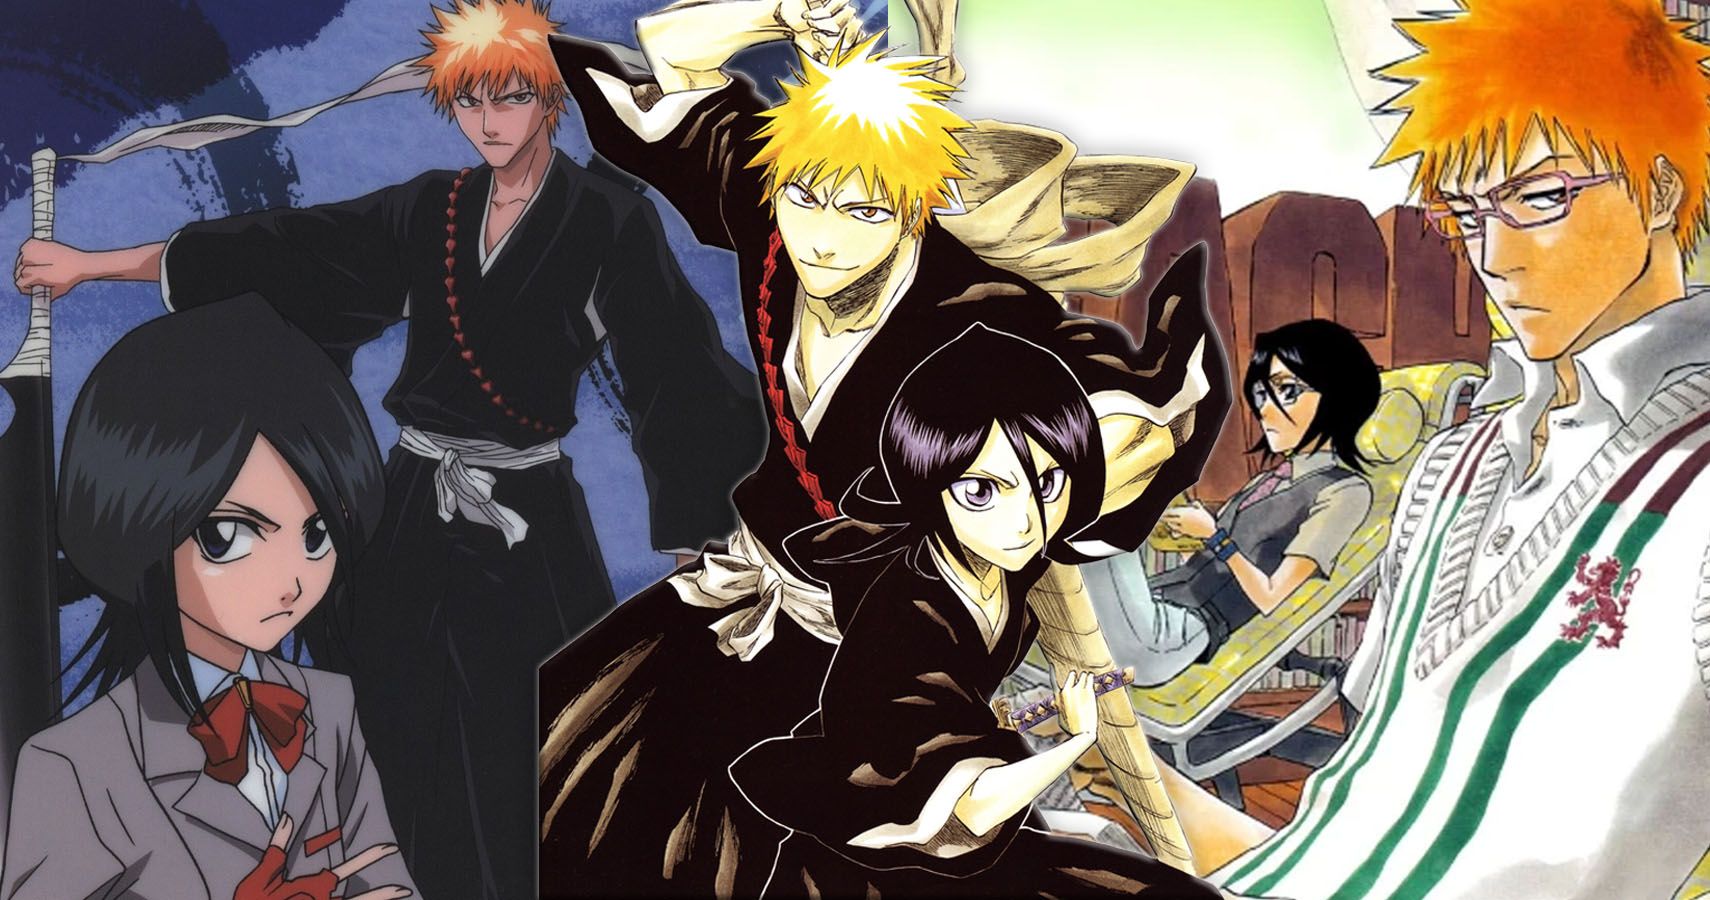 Collage of Ichigo and Rukia from the Bleach series